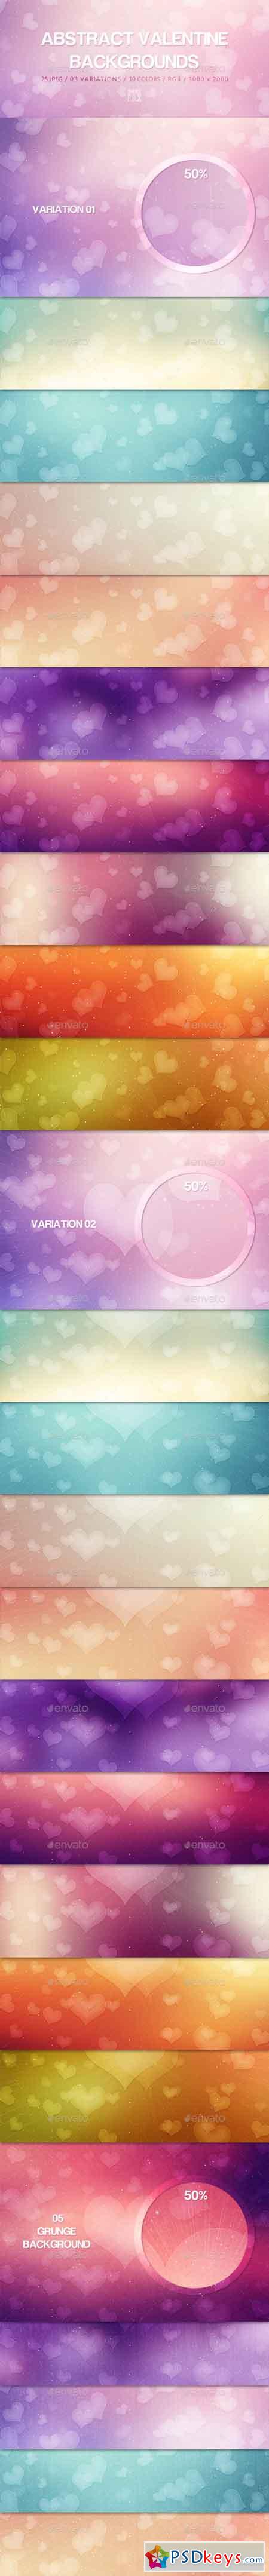 25 Abstract Valentine Backgrounds 14381937